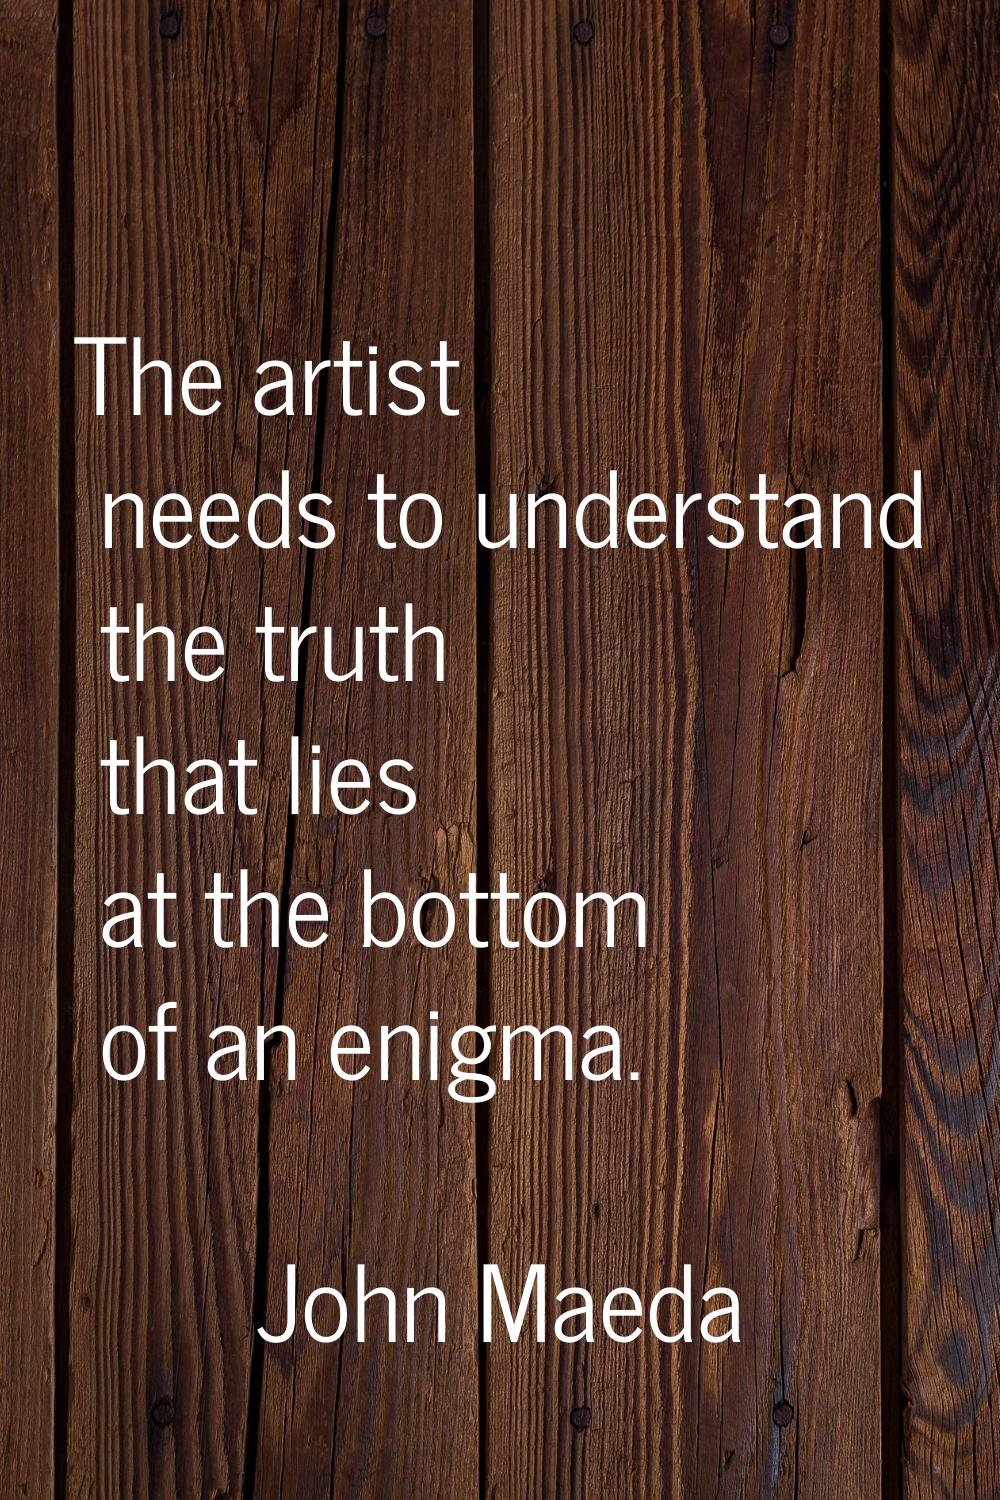 The artist needs to understand the truth that lies at the bottom of an enigma.